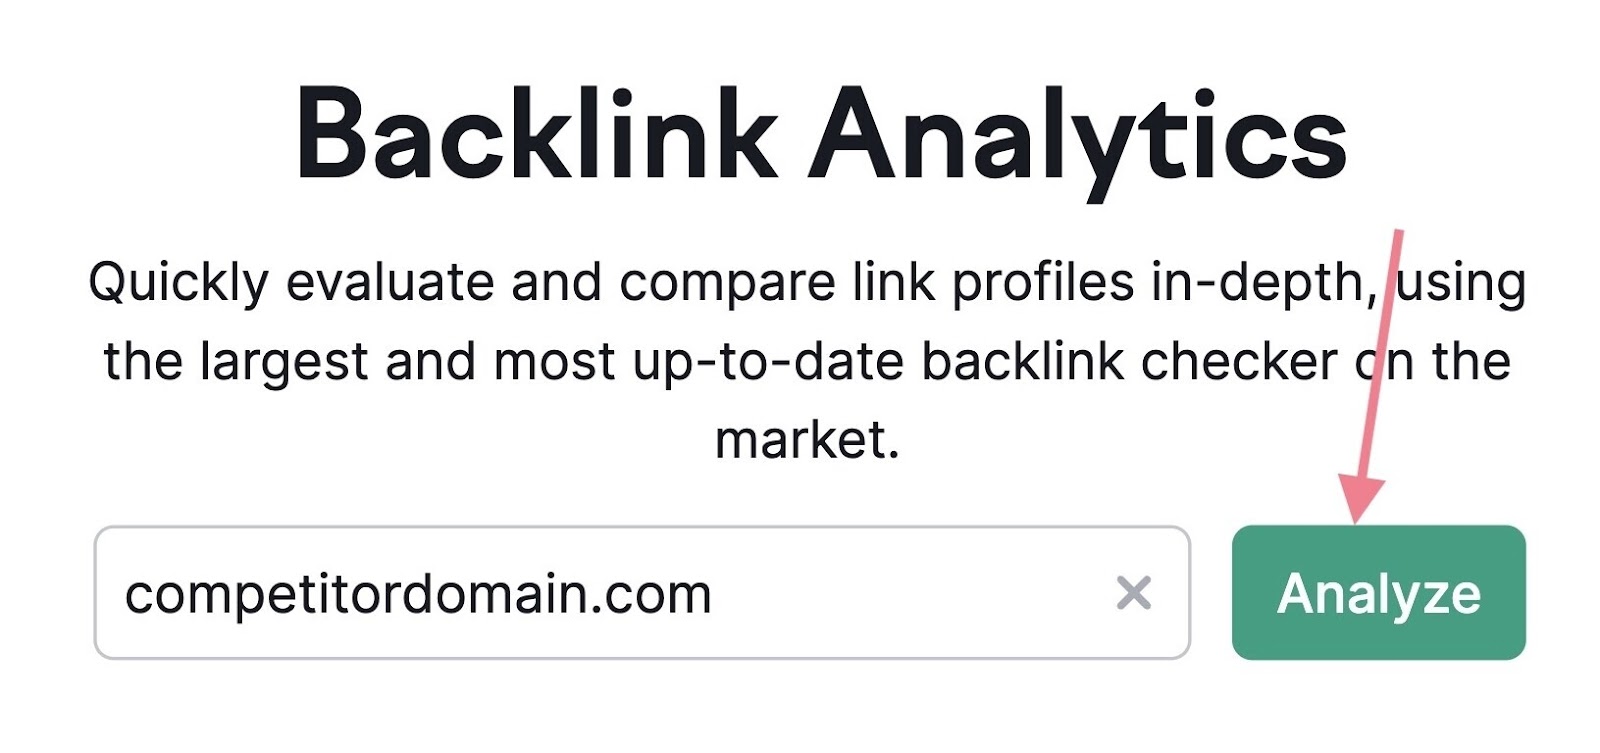 backlink analytics tool competitor domain